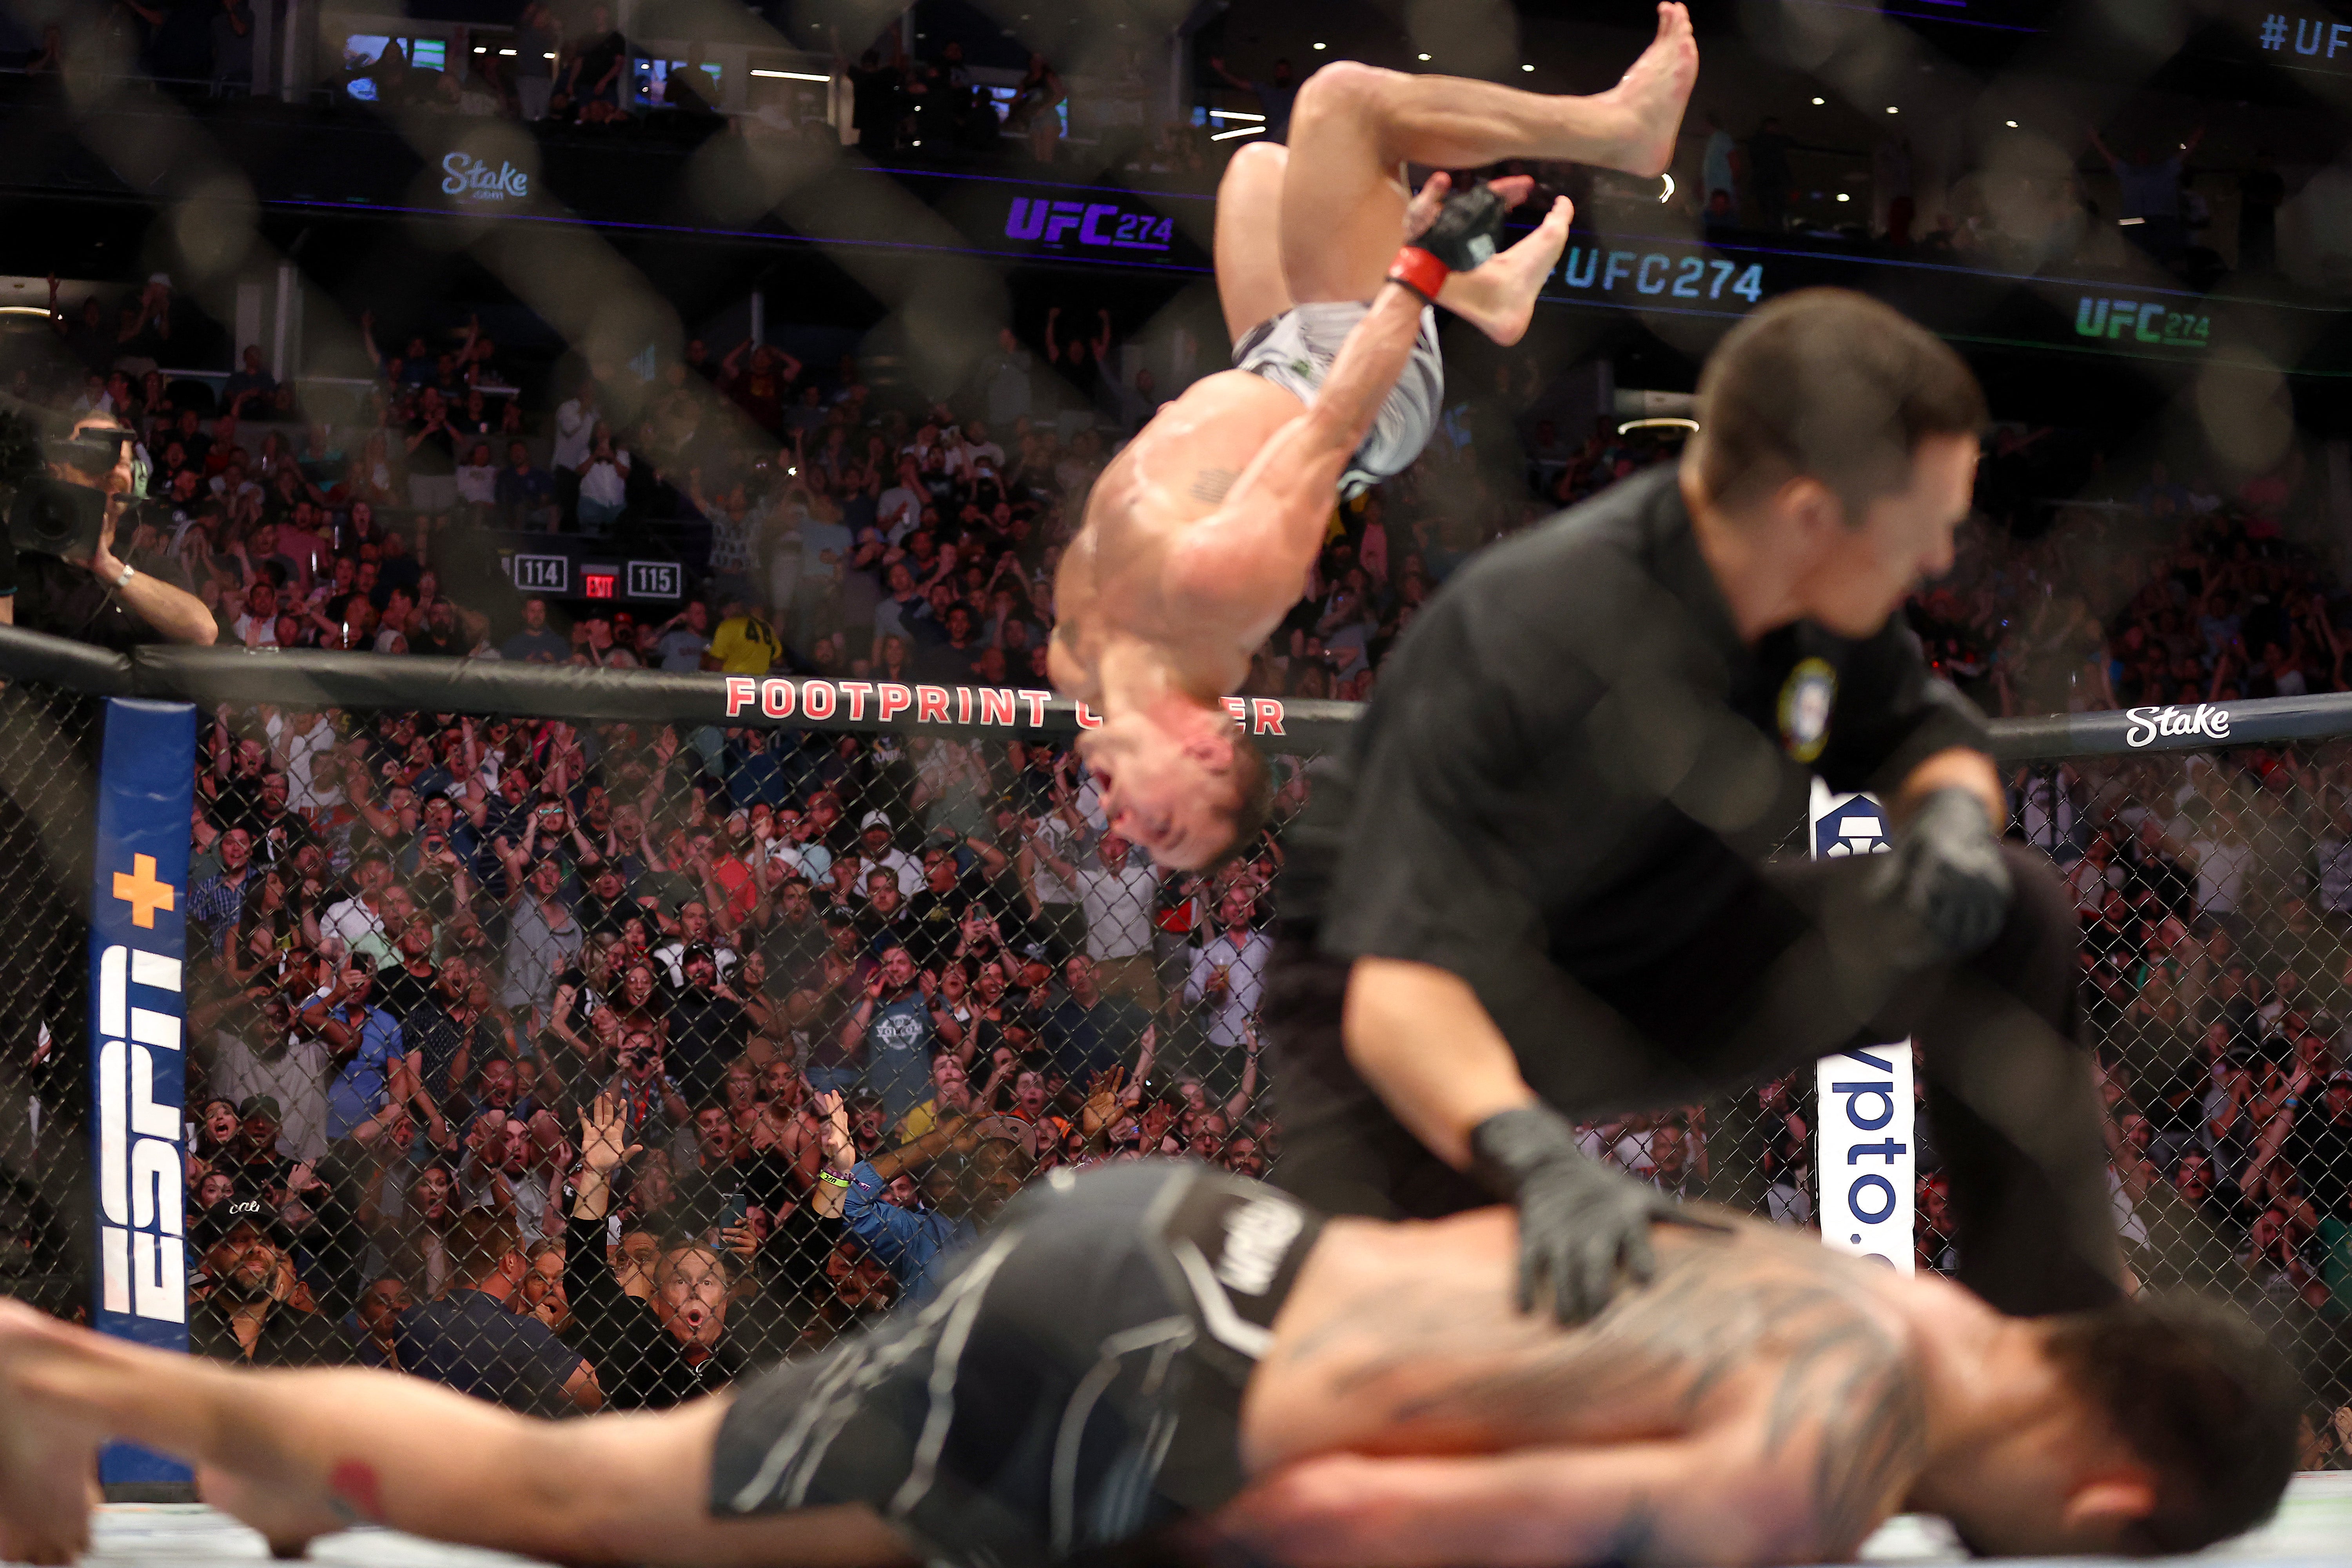 Michael Chandler recorded one of the greatest knockouts in UFC history, against Tony Ferguson